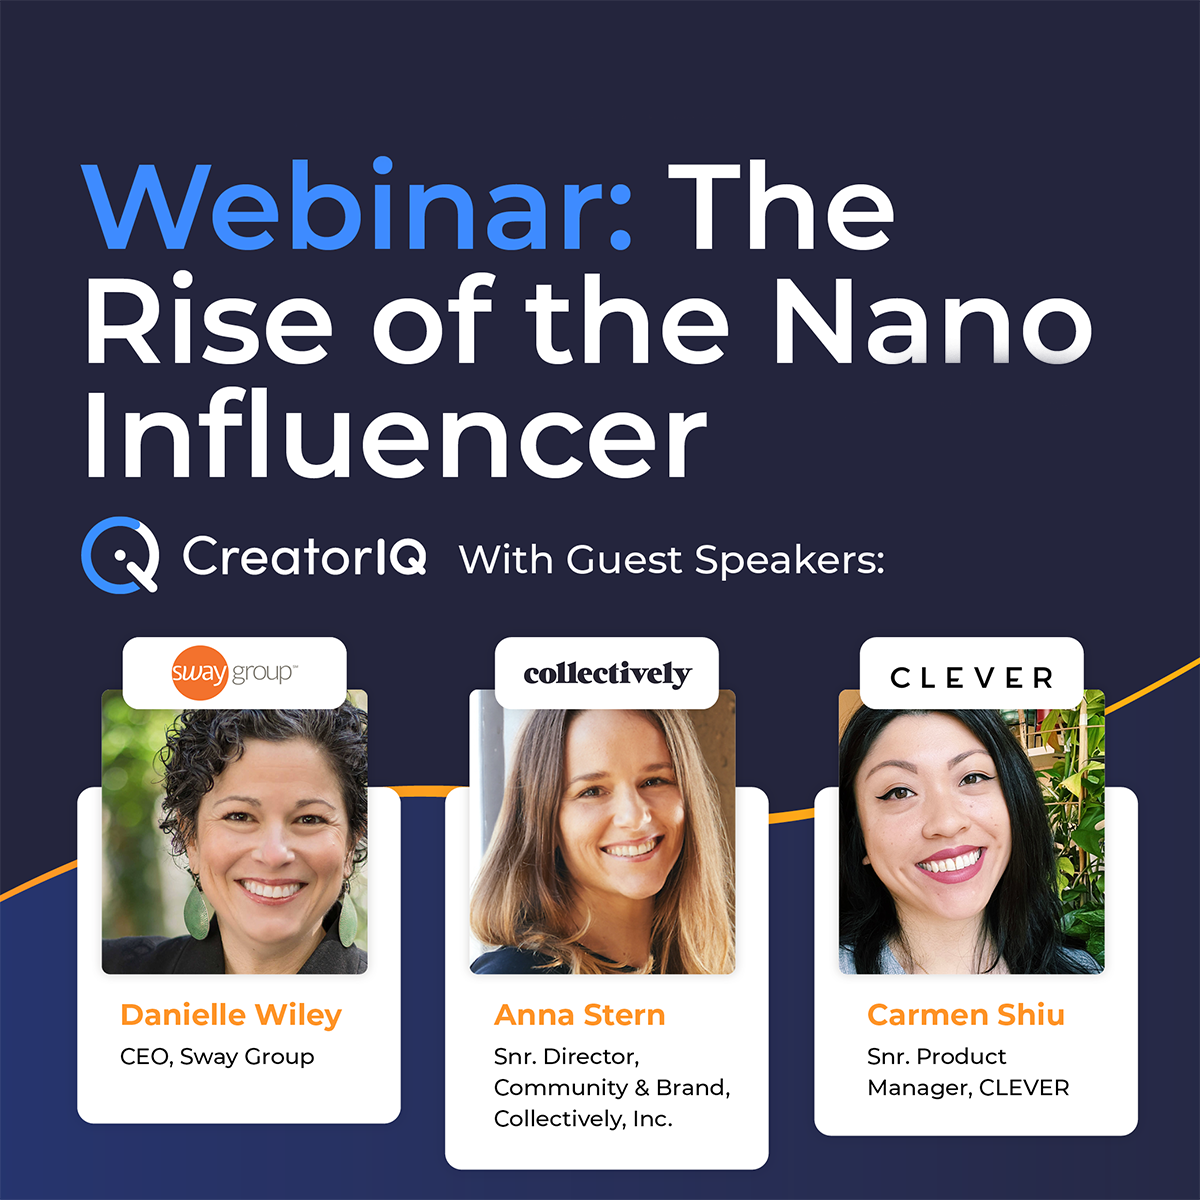 The Rise of the Nano Influencer